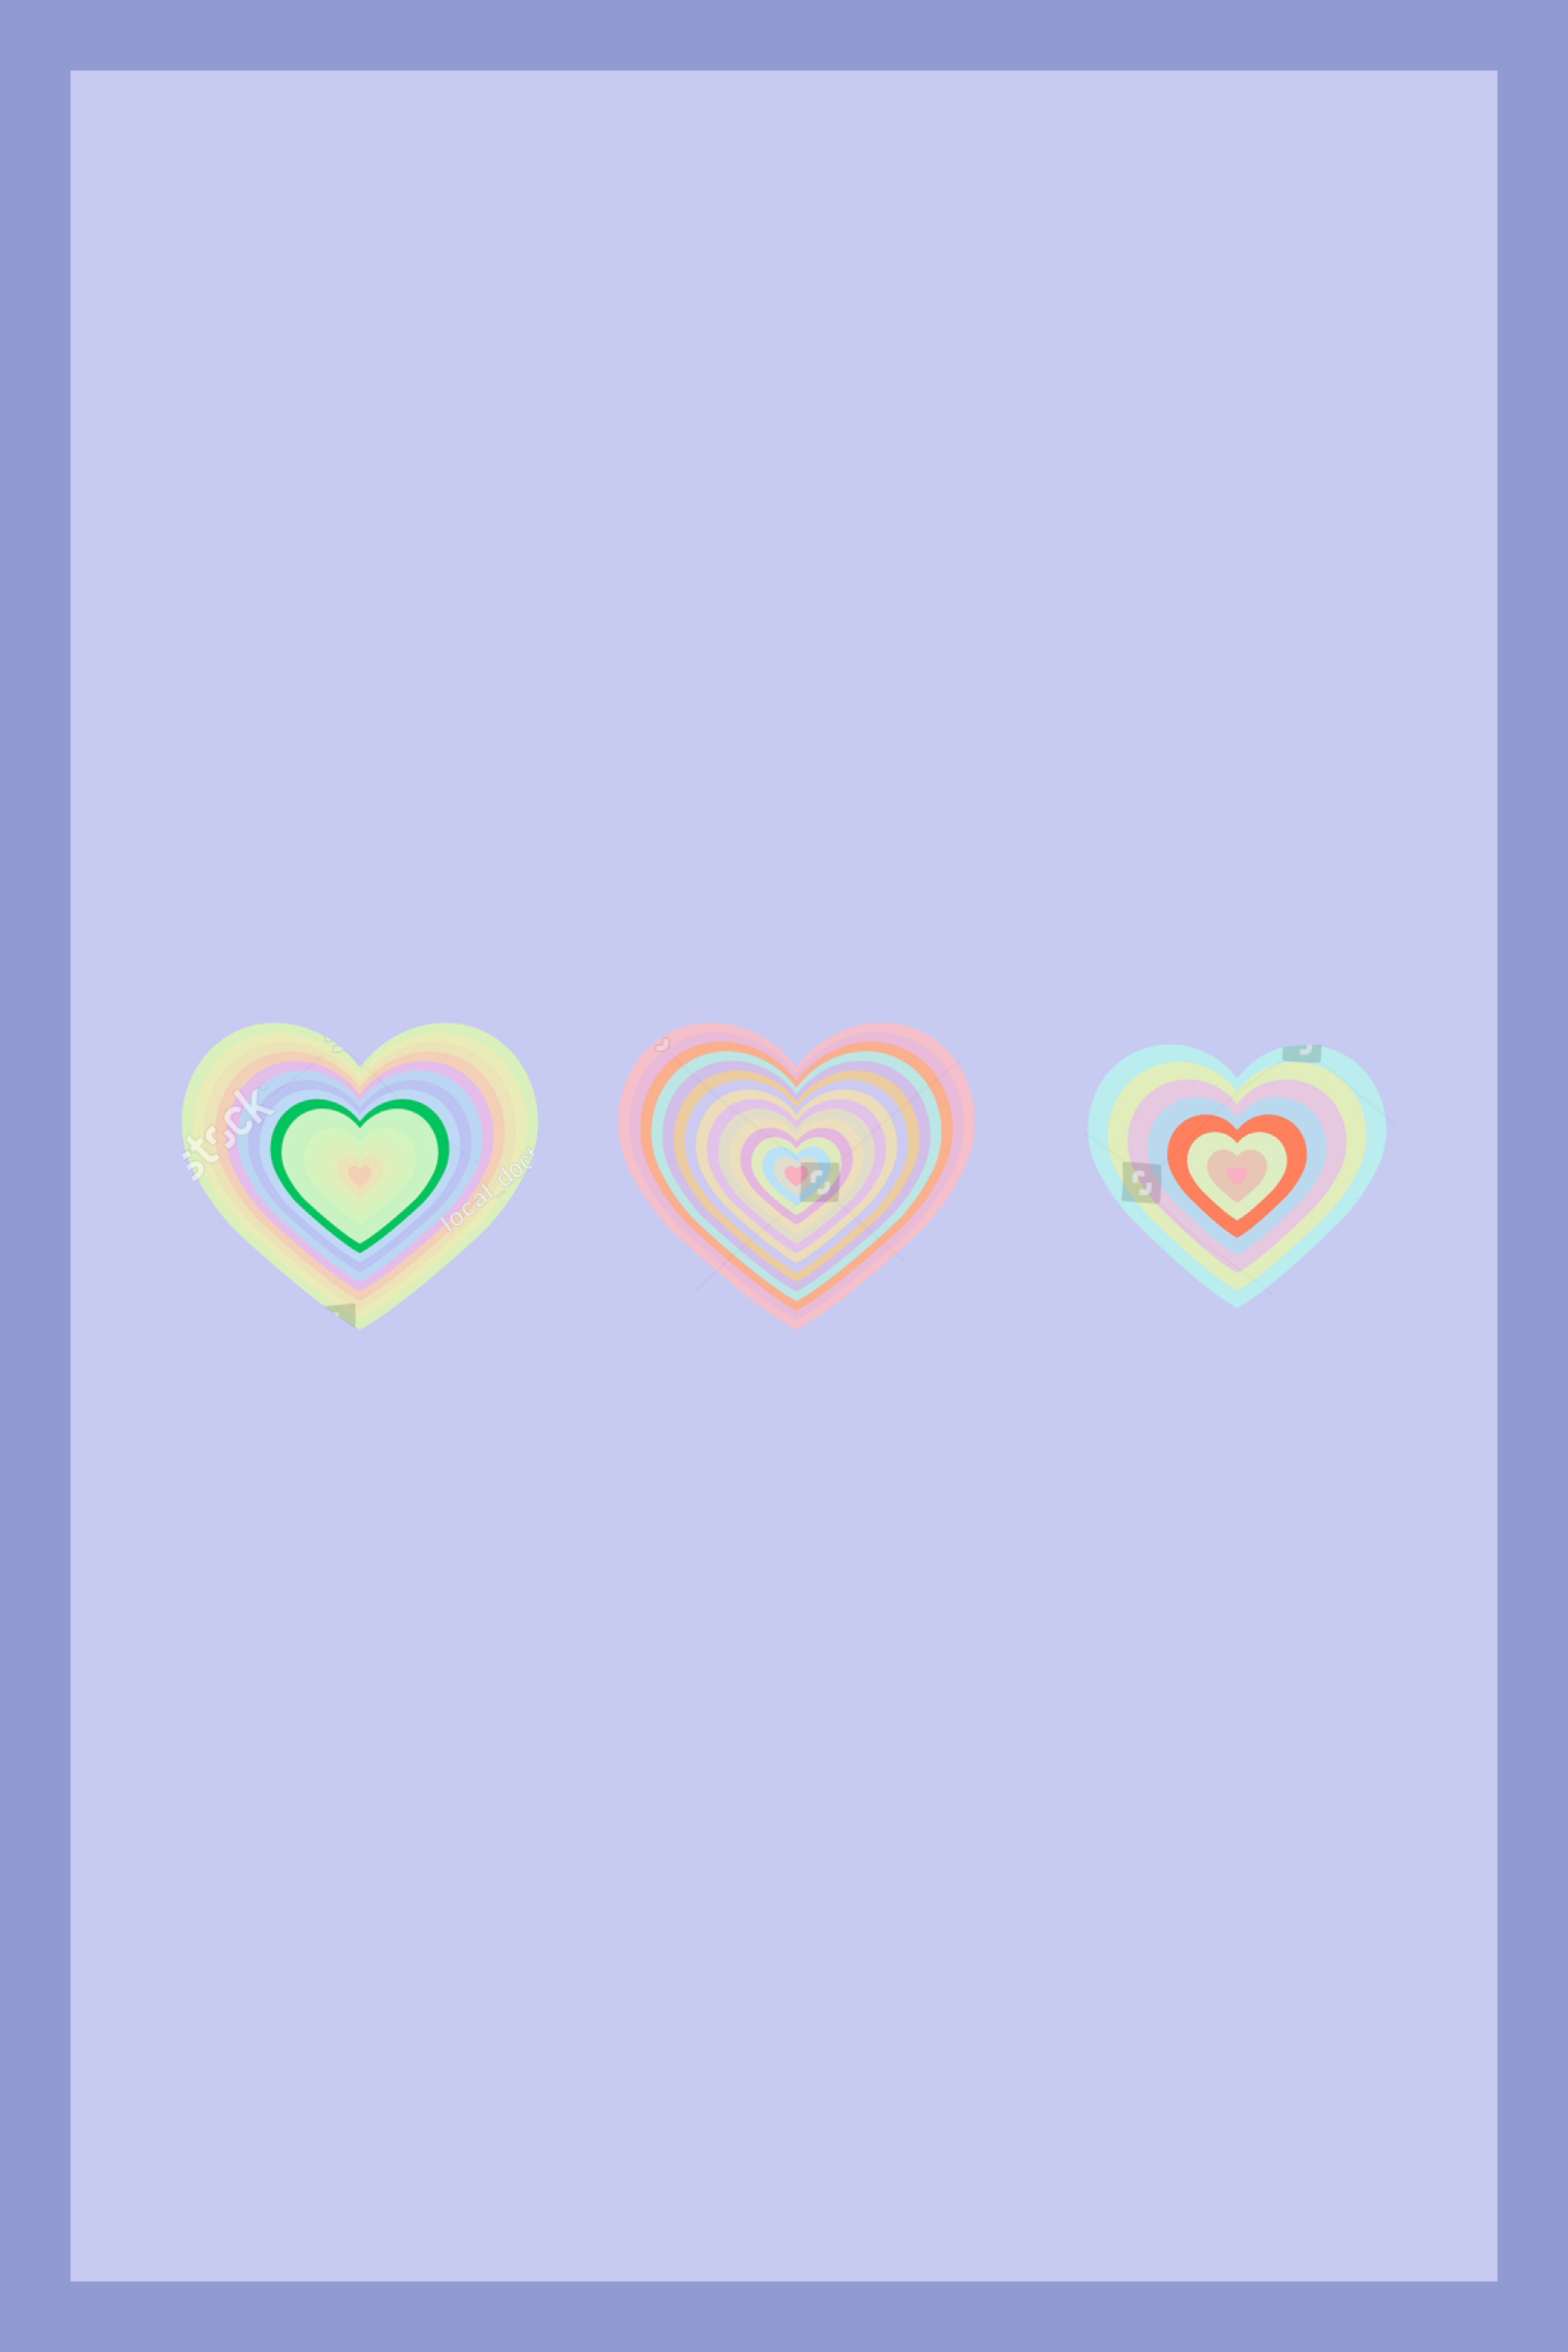 Three hearts made of concentric lines in pastel colors.